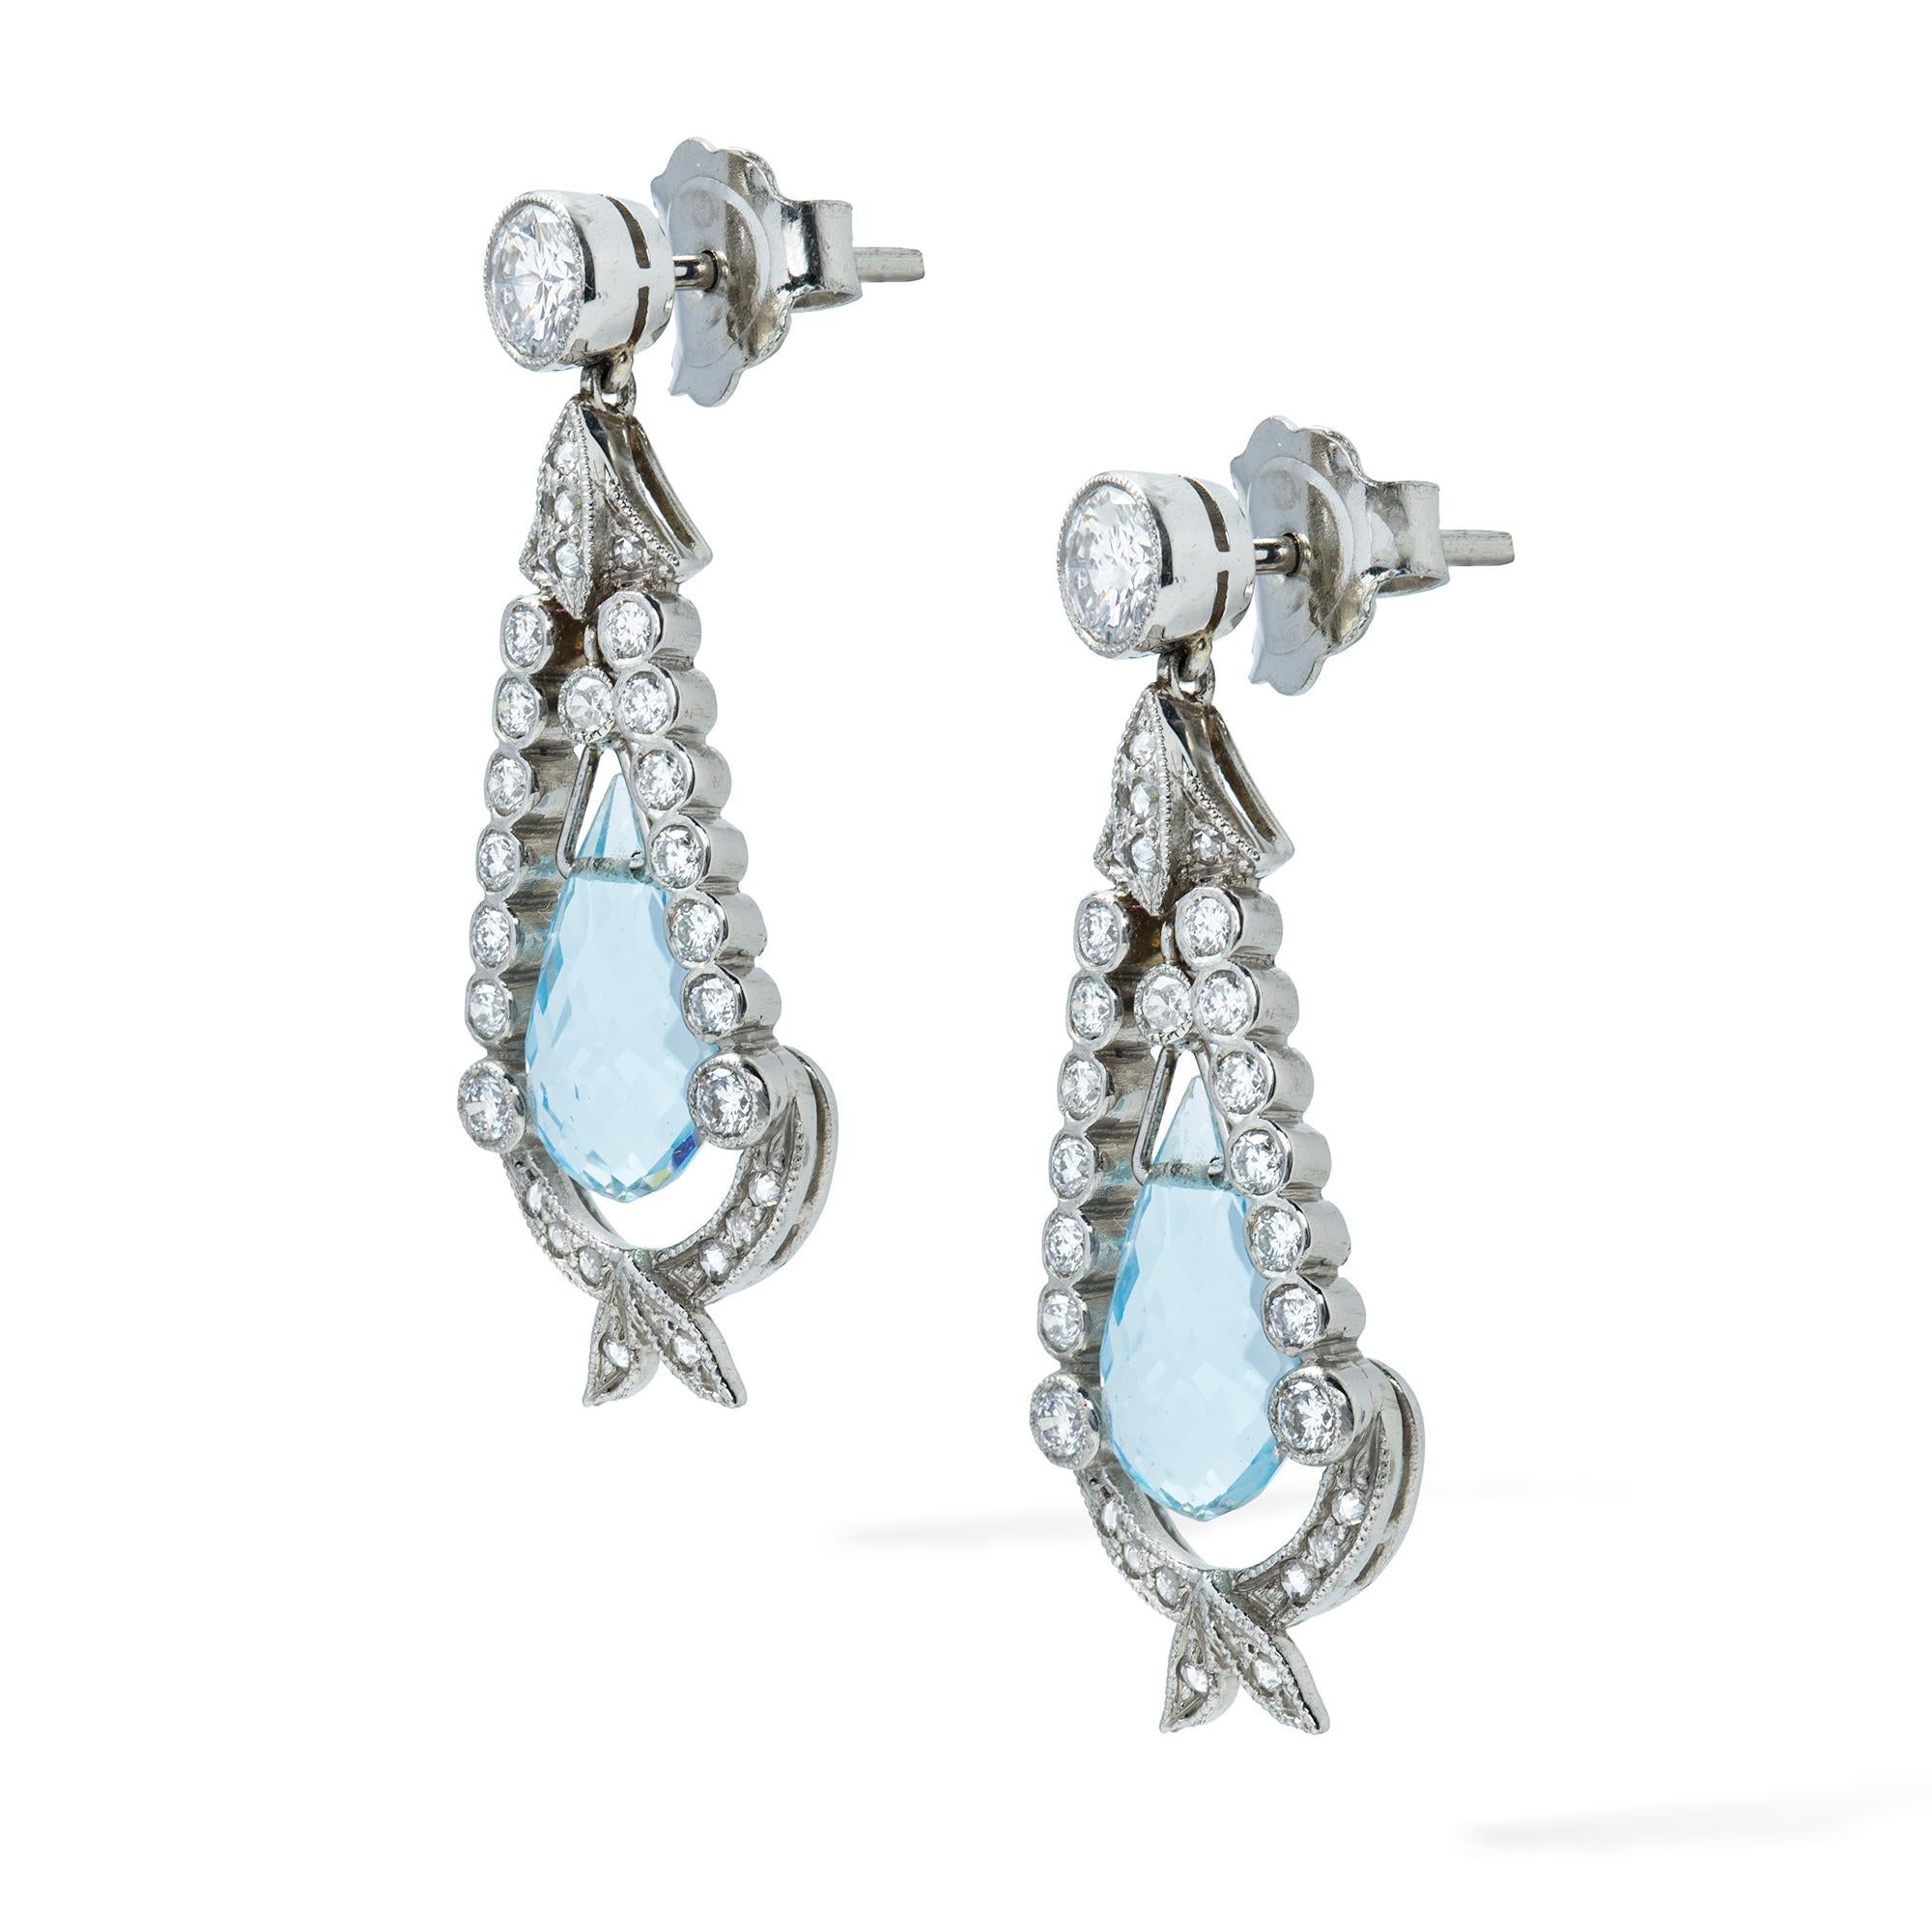 A pair of diamond and aquamarine drop earrings, each earring consisting of a briolette-cut aquamarine with total combined weight of 2.90 carats, suspended in a frame of brilliant-cut and rose-cut diamonds to a form of a wreath, suspended by a single